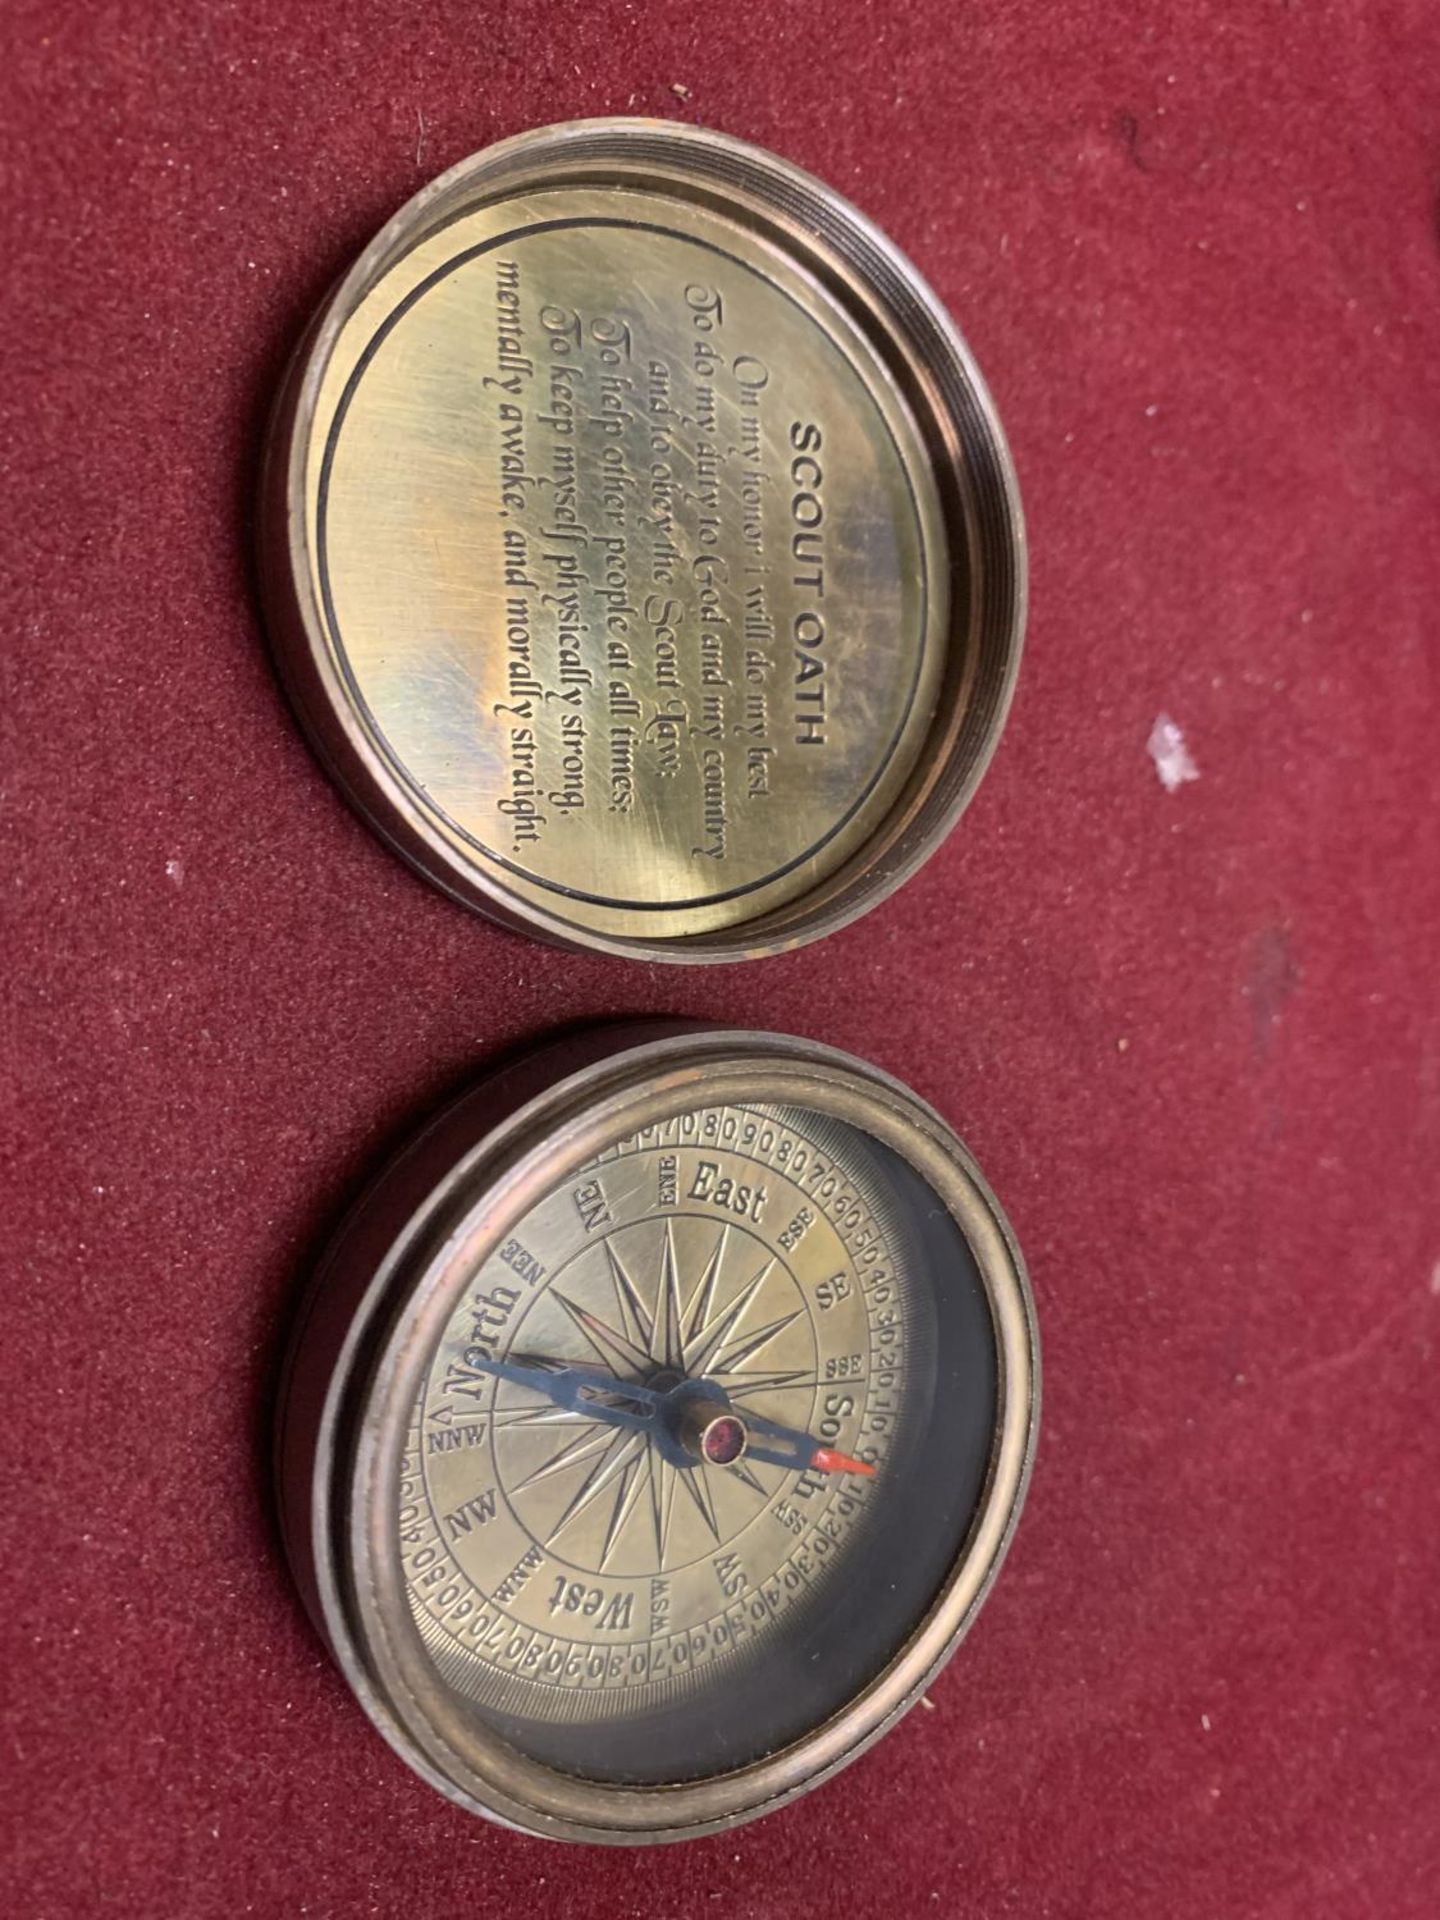 A SMALL BOXED BRASS BOY SCOUT COMPASS - Image 8 of 8